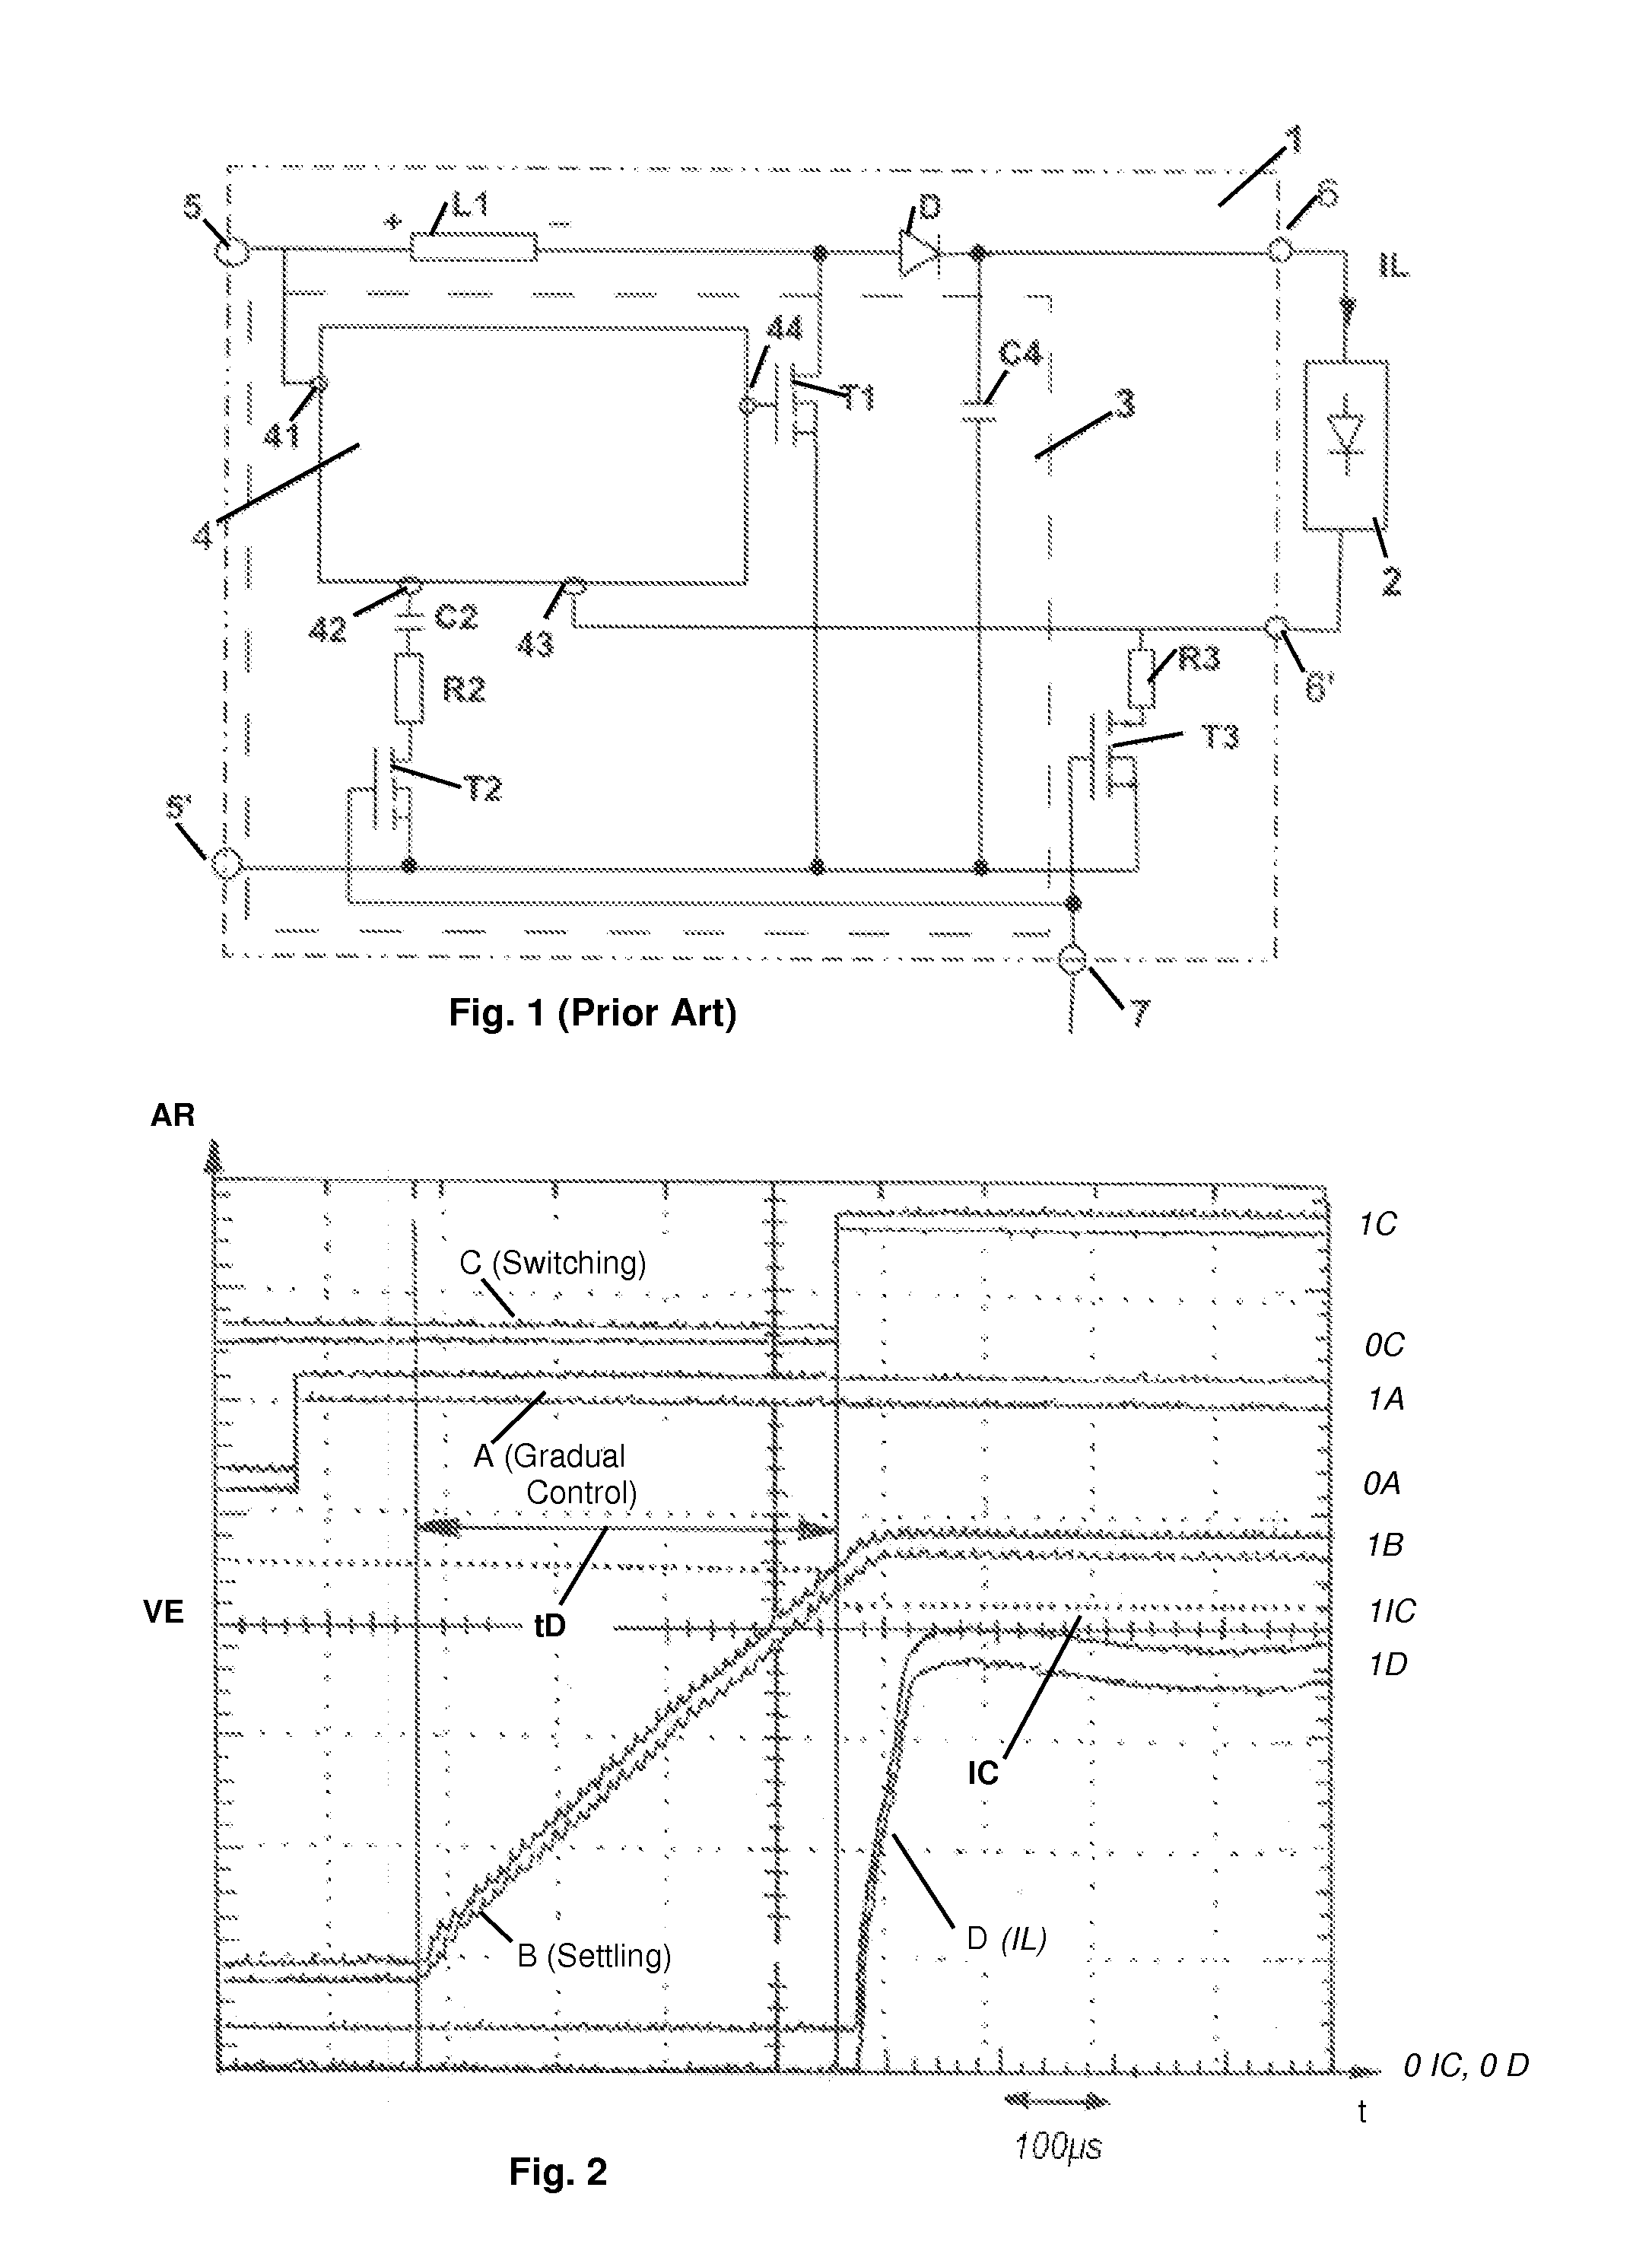 Method for controlling light-emitting diodes